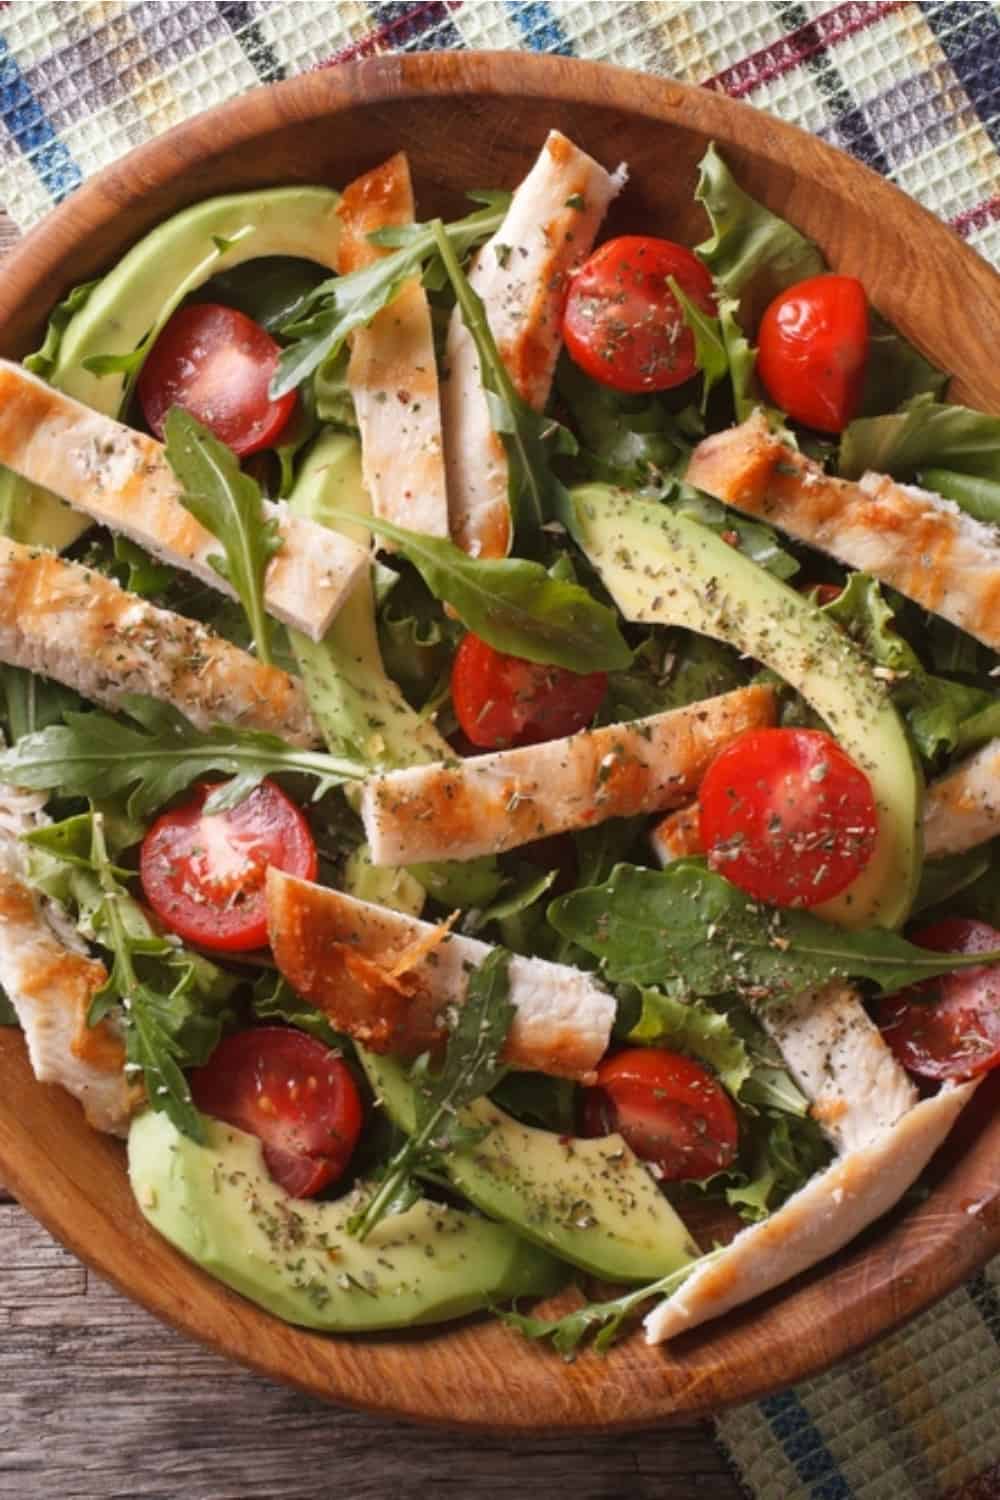 Chicken salad with avocado, arugula and cherry tomatoes in a wooden plate